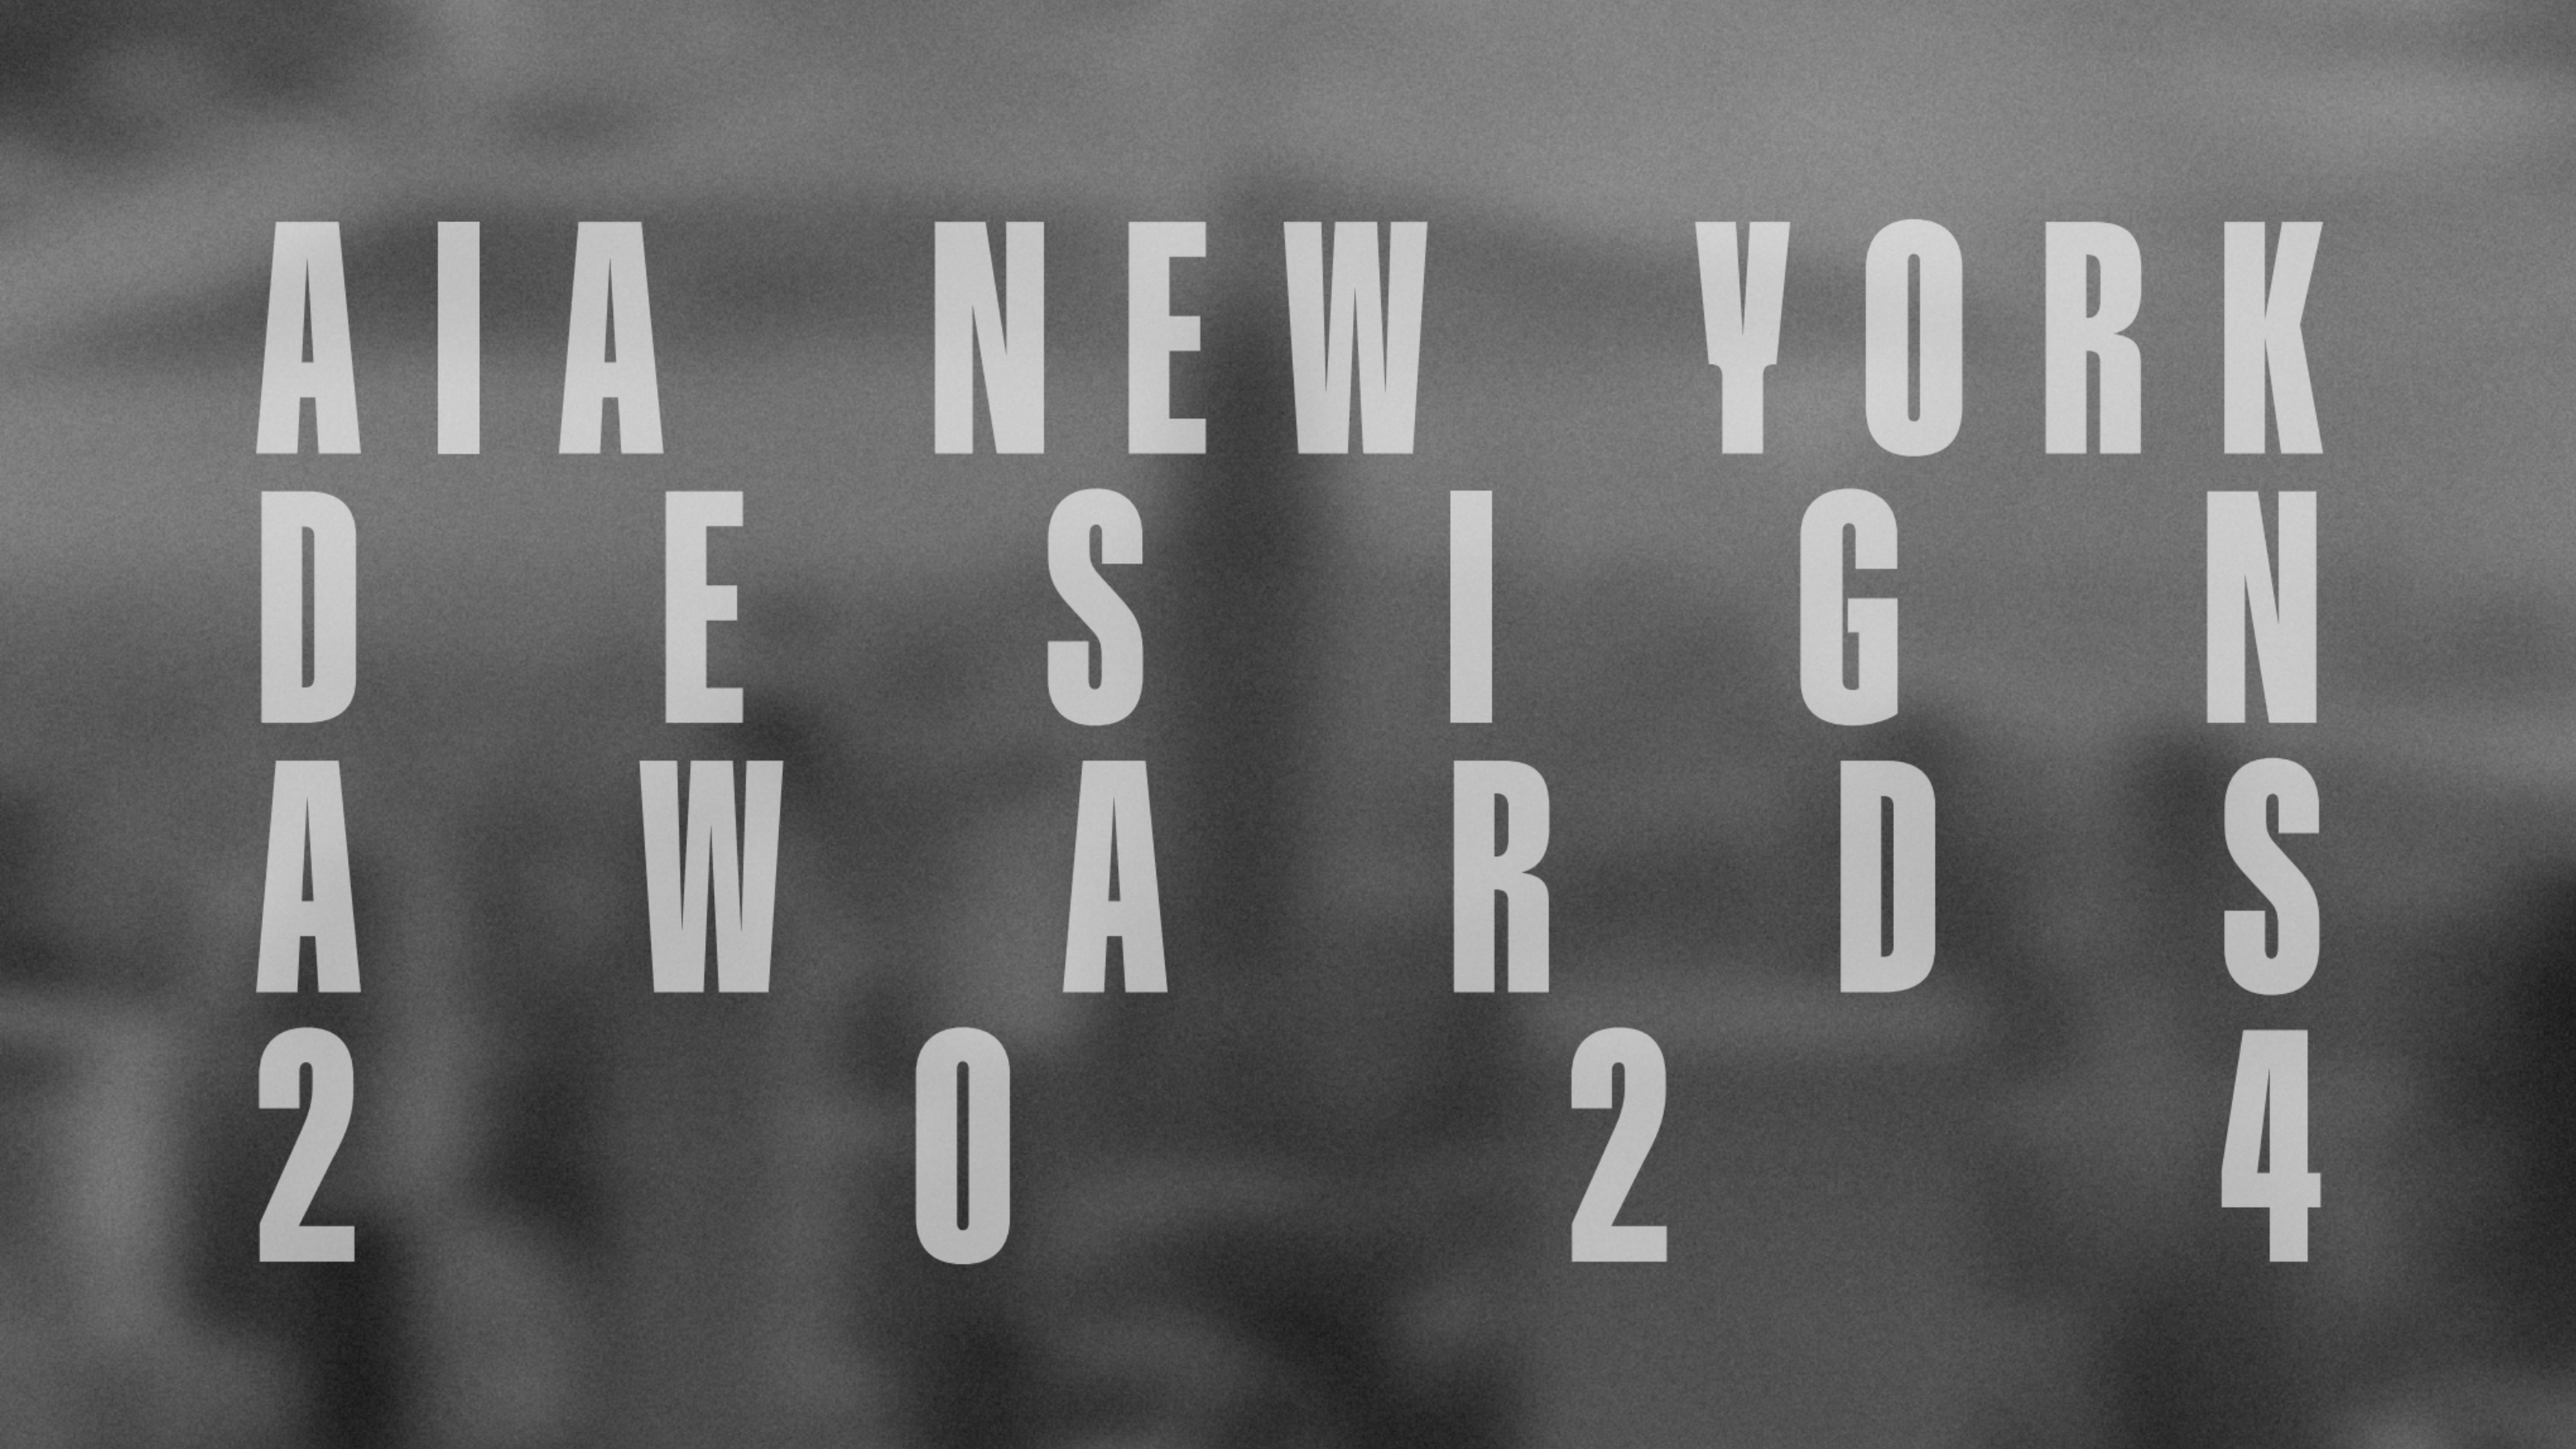 Grey text over a blurry black and white photo of New York City.